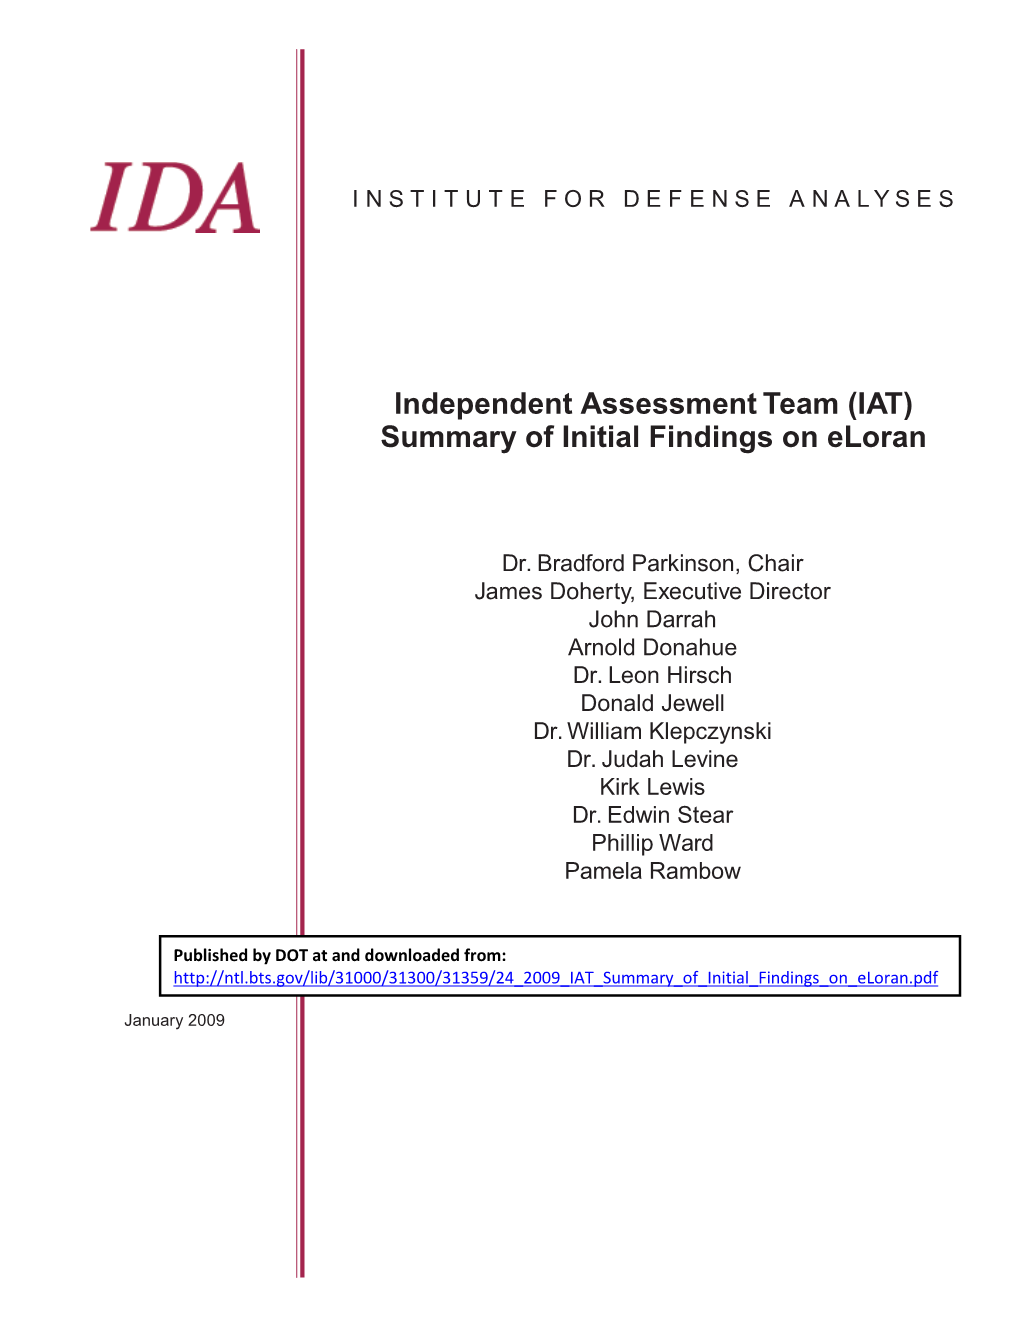 Independent Assessment Team (IAT) Summary of Initial Findings on Eloran